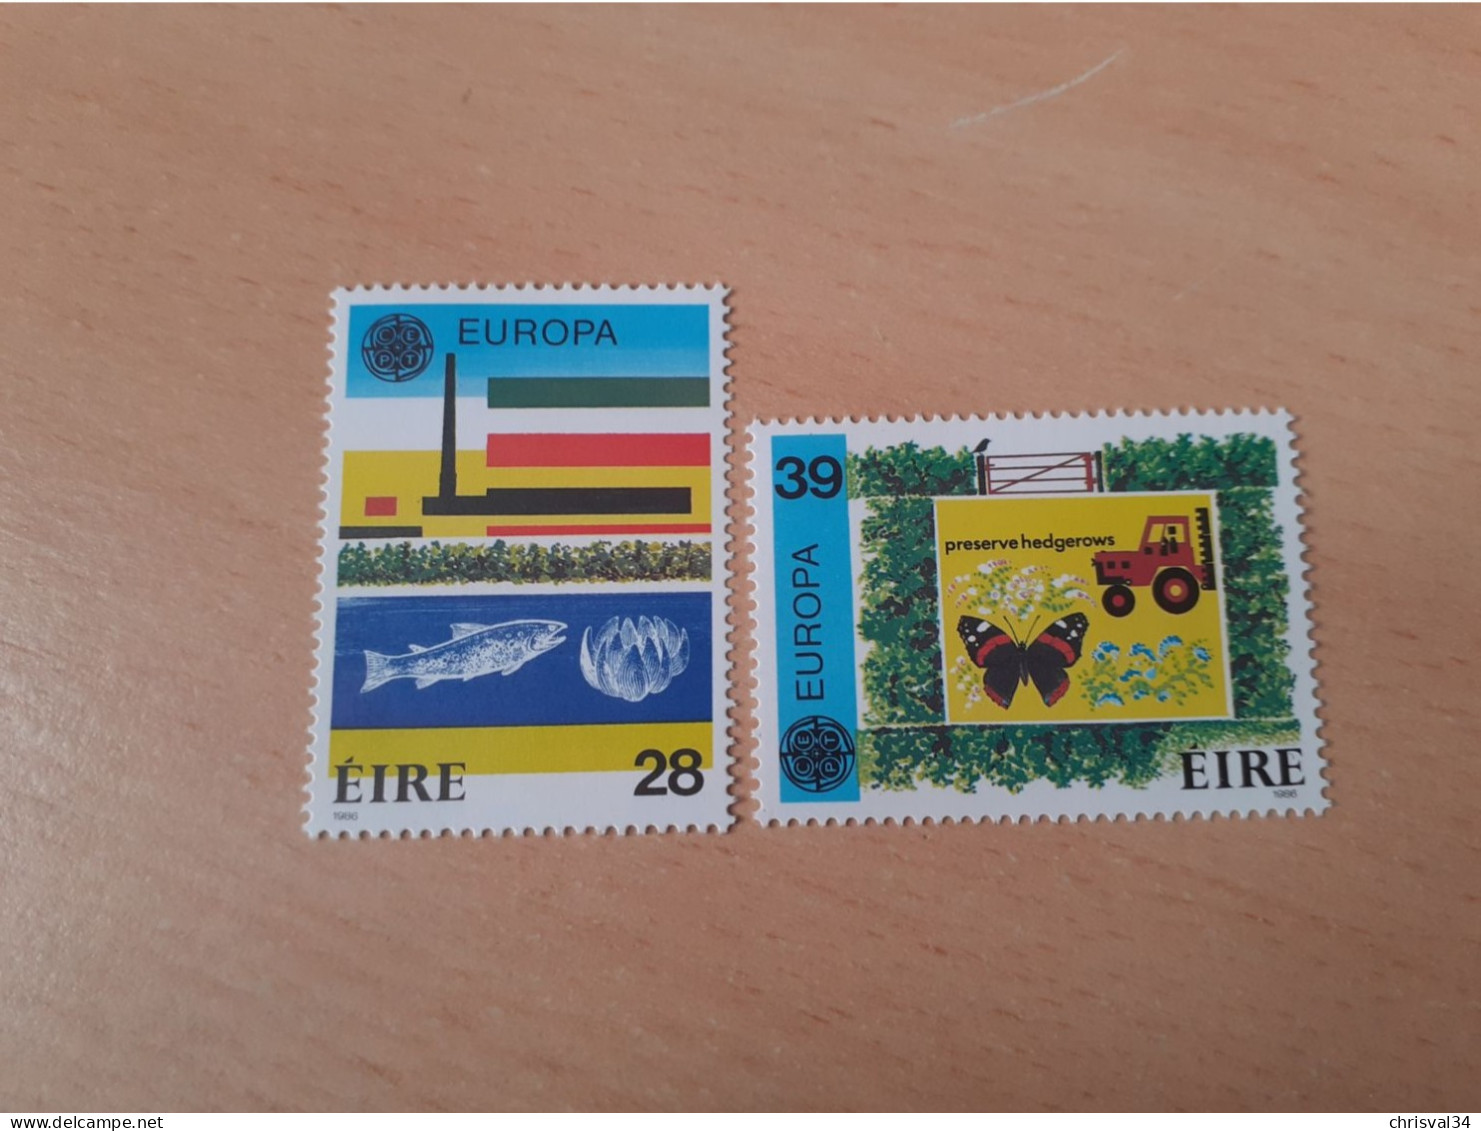 TIMBRES  IRLANDE    ANNEE   1986   N  592  /  593     NEUFS  LUXE** - Nuevos